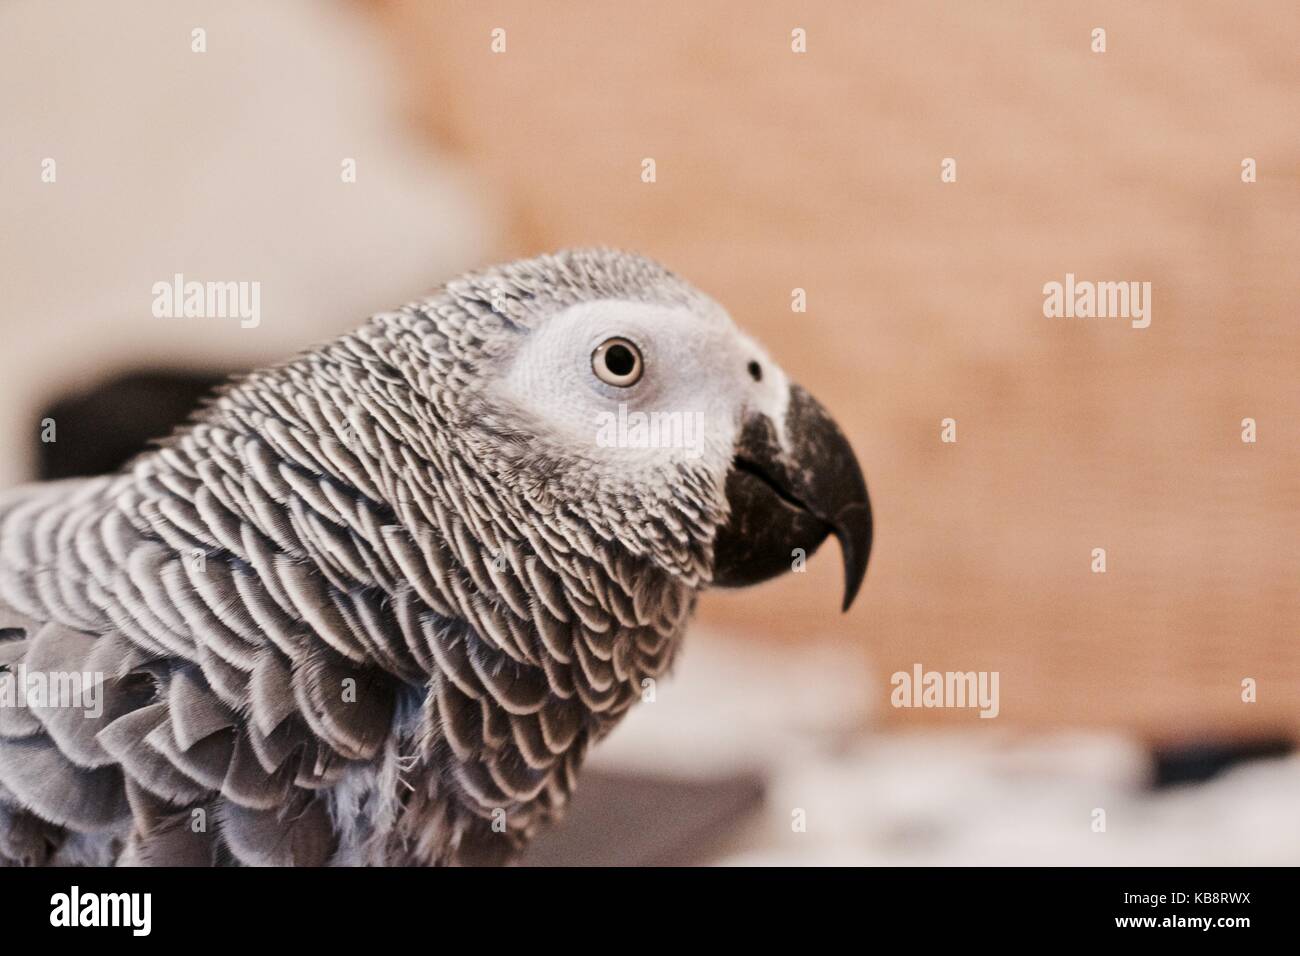 Small home pet. African gre parrot. Natural animal concept. Stock Photo